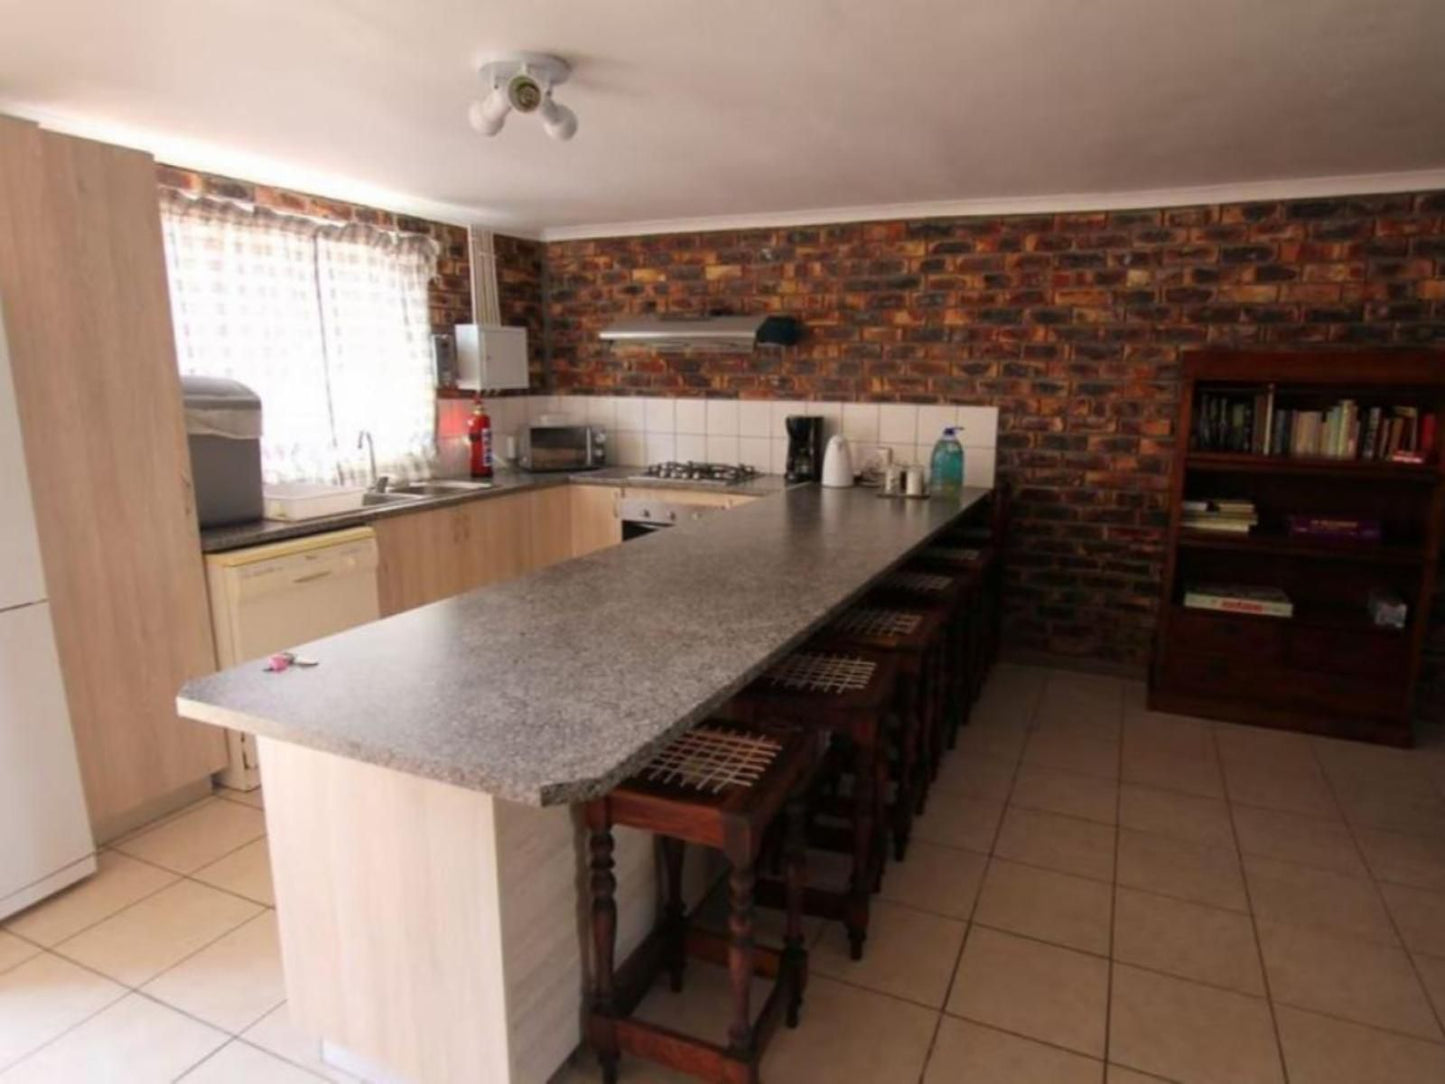 Clanwilliam Accommodation Clanwilliam Western Cape South Africa Kitchen